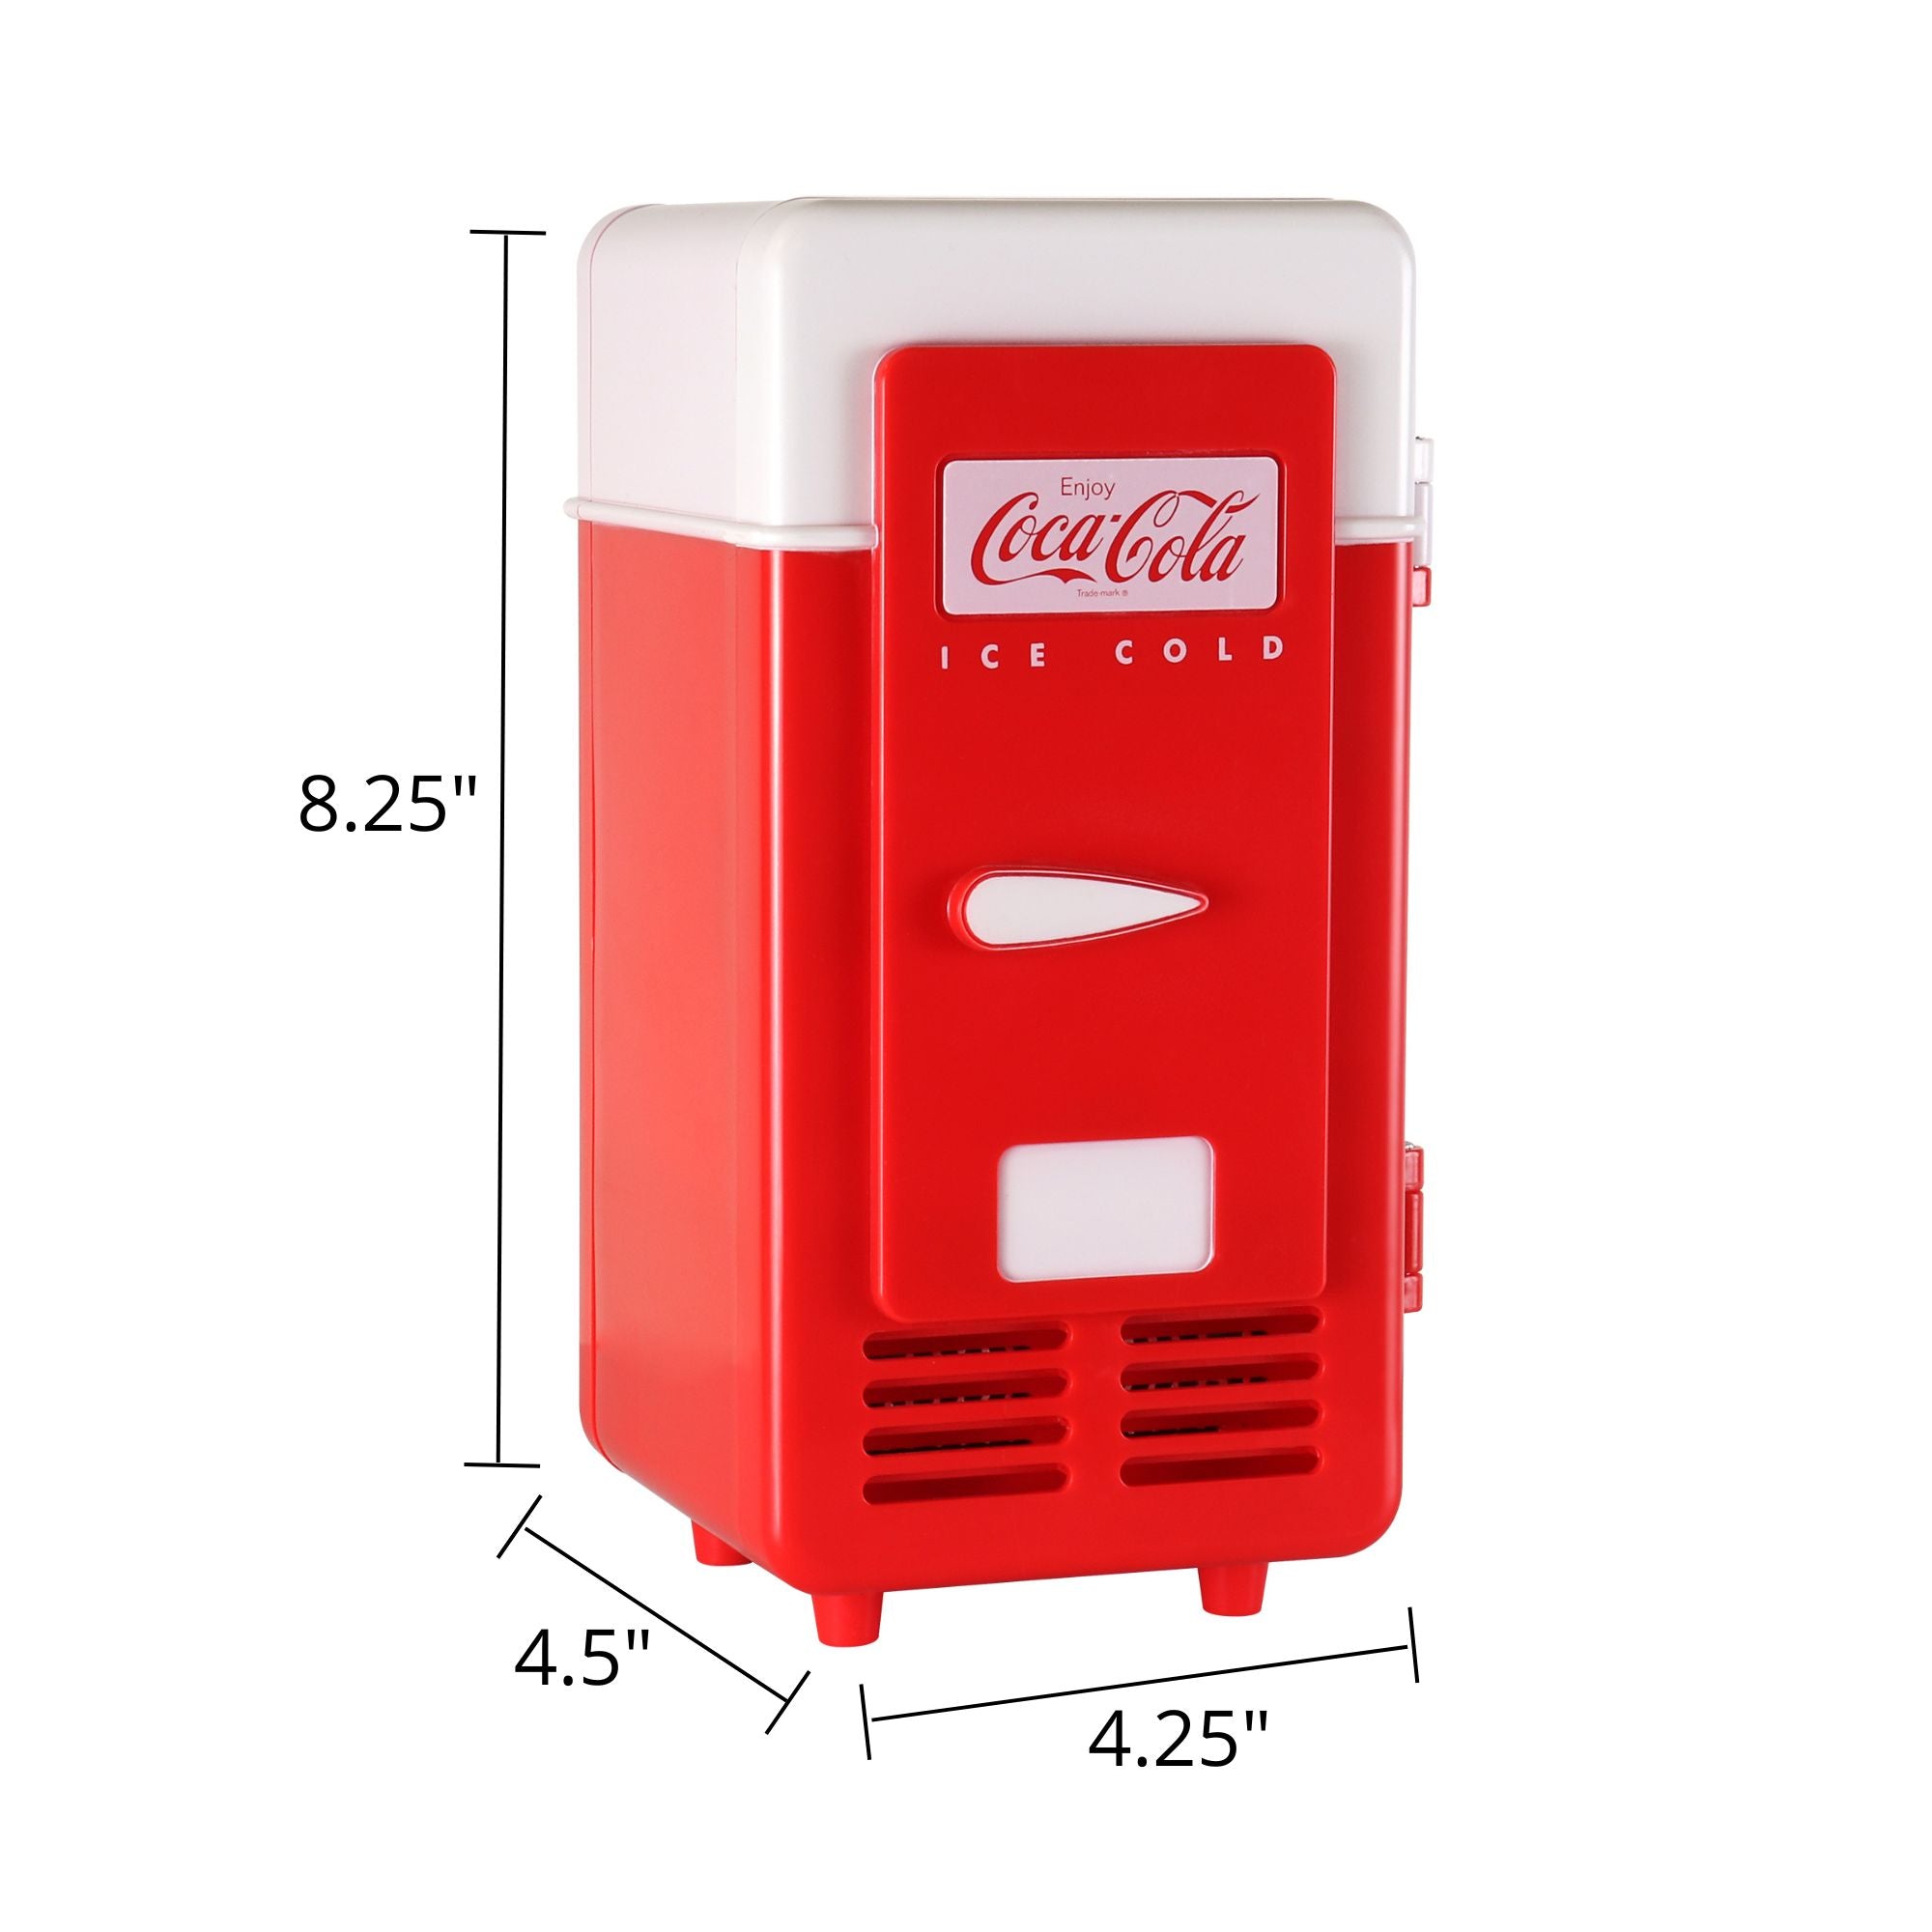  Product shot of Coca-Cola single can USB cooler on a white background with dimensions labeled